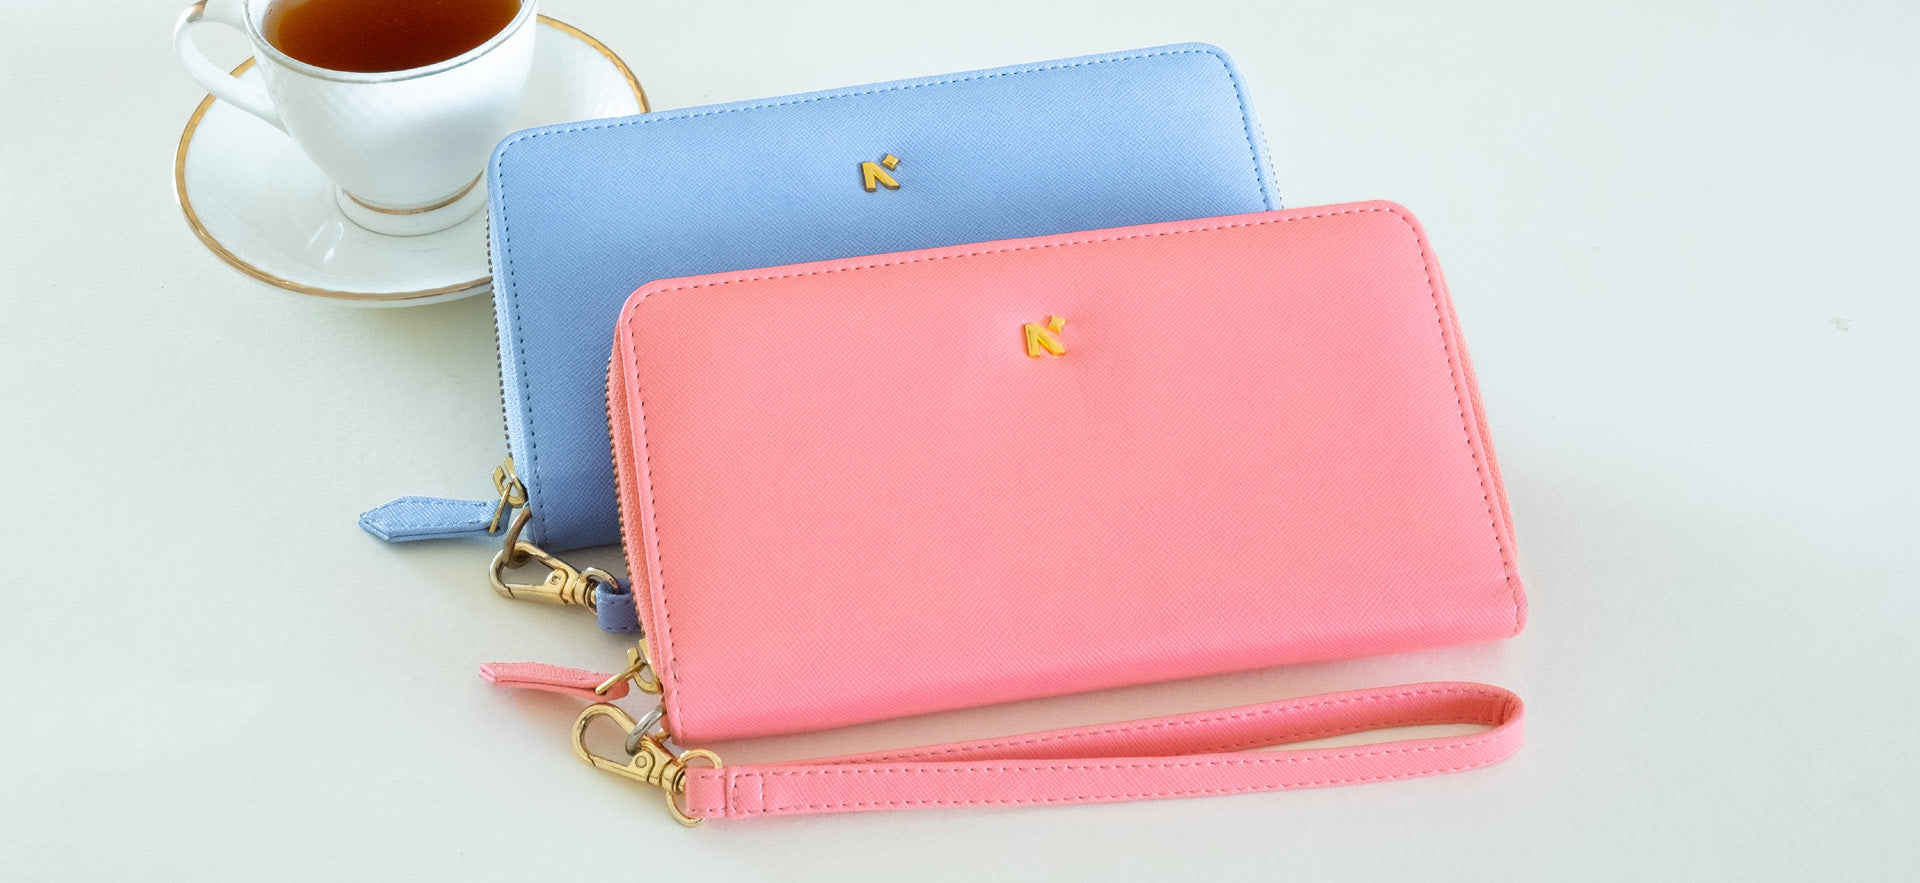 Classic Wallets: Buy Best Classic Purse Online at Great Prices - Zouk